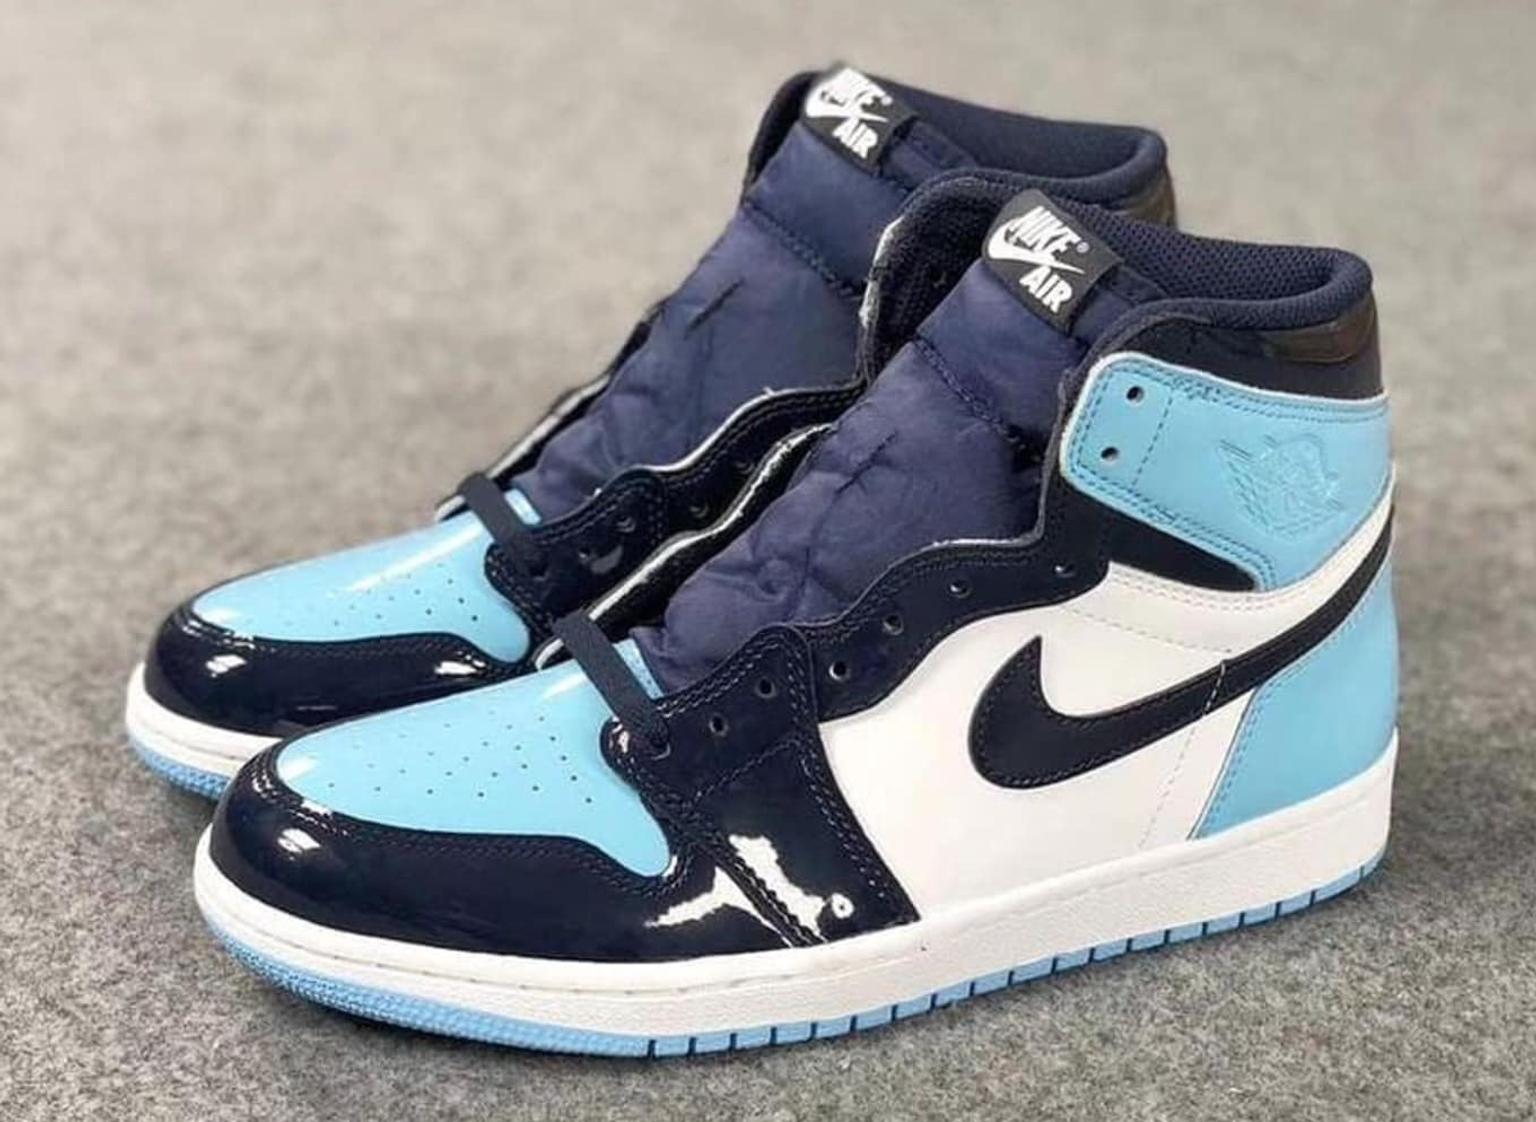 jordan 1 blue and white patent leather